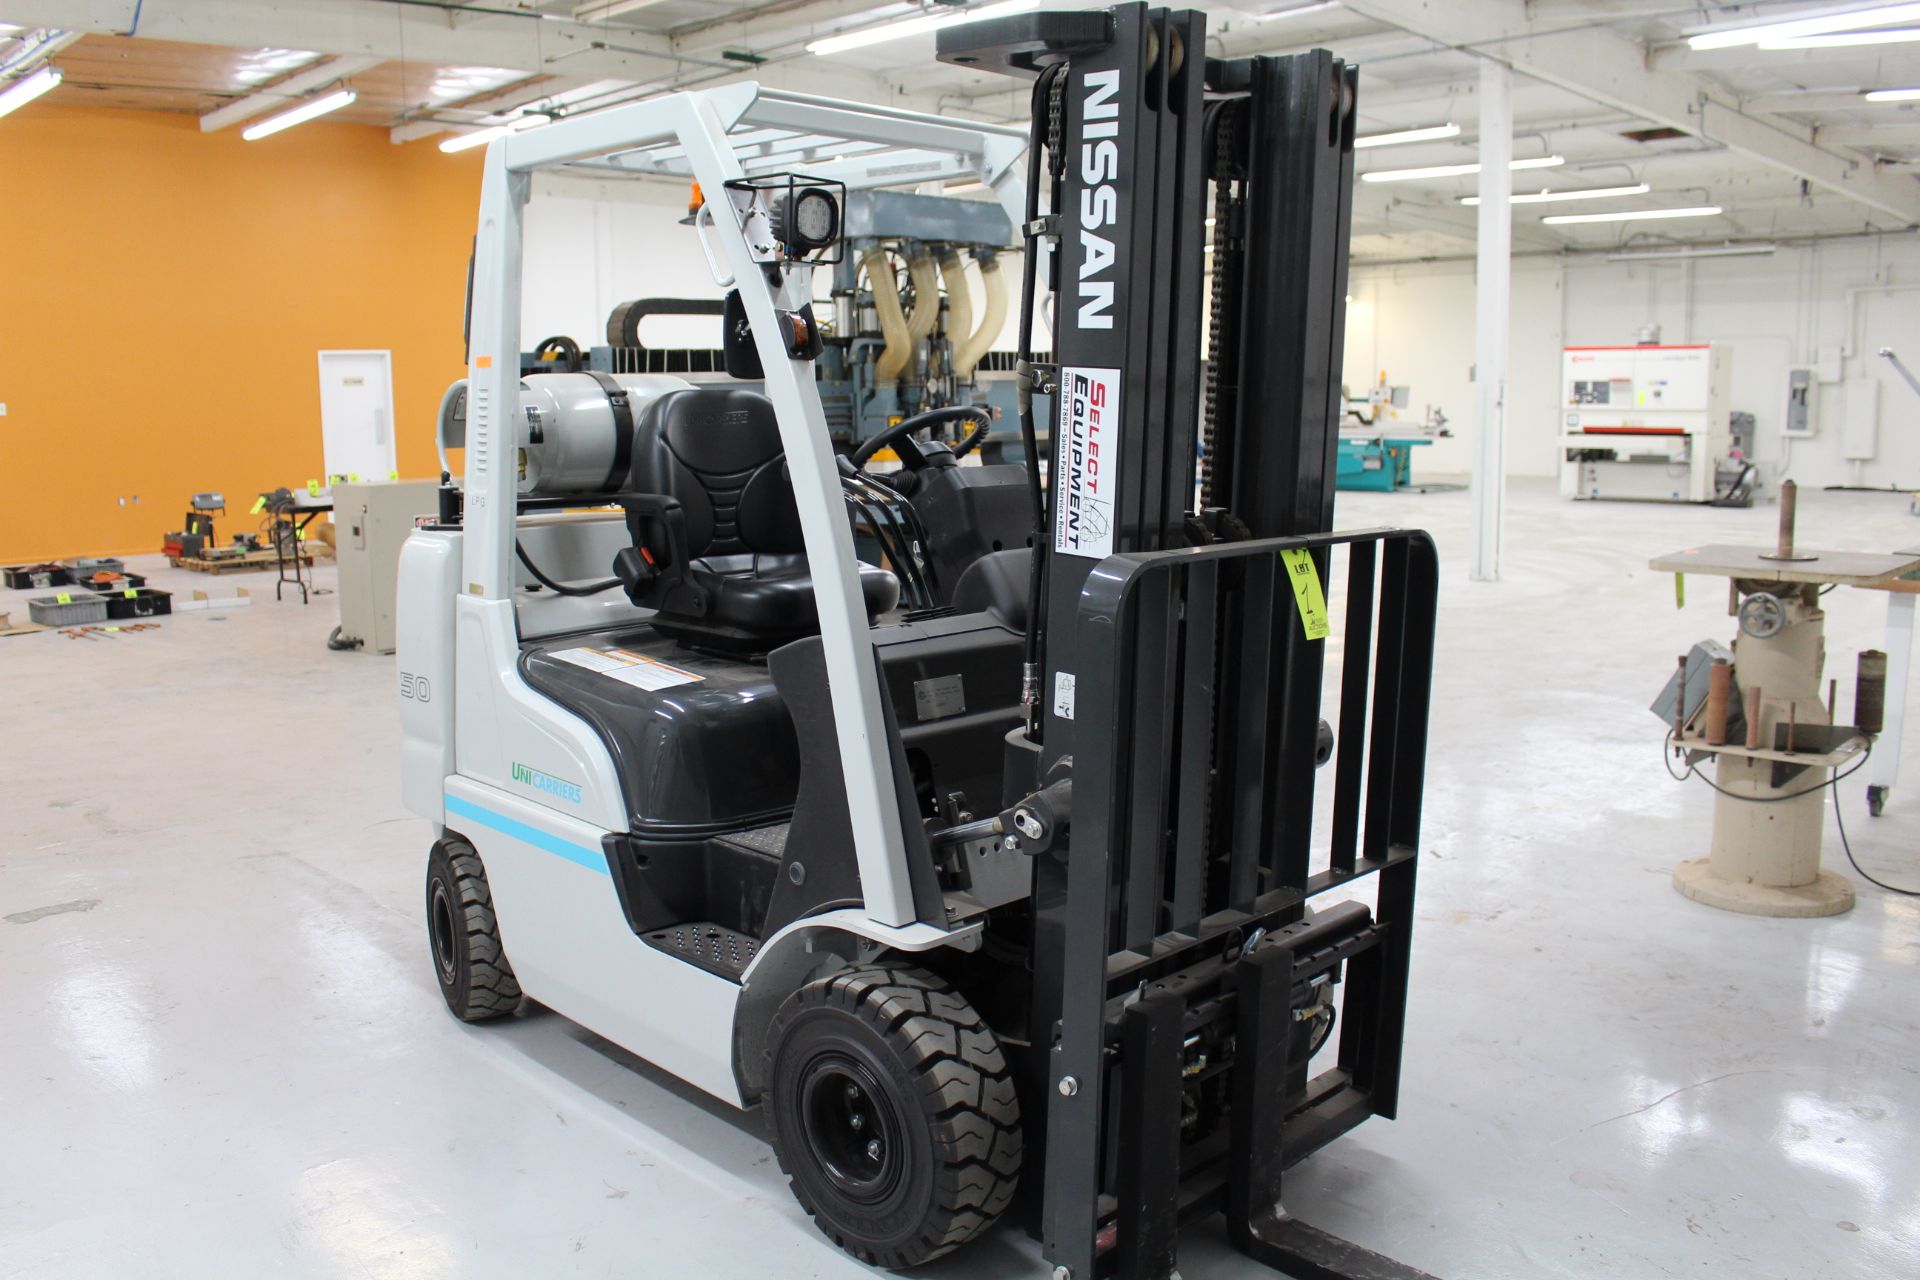 2015 NISSAN FORK LIFT MODEL MAP1F2A25LV, 5000 LBS CAP., PROPANE, SOLID TIRES, SIDE SHIFT, 3 STAGE,